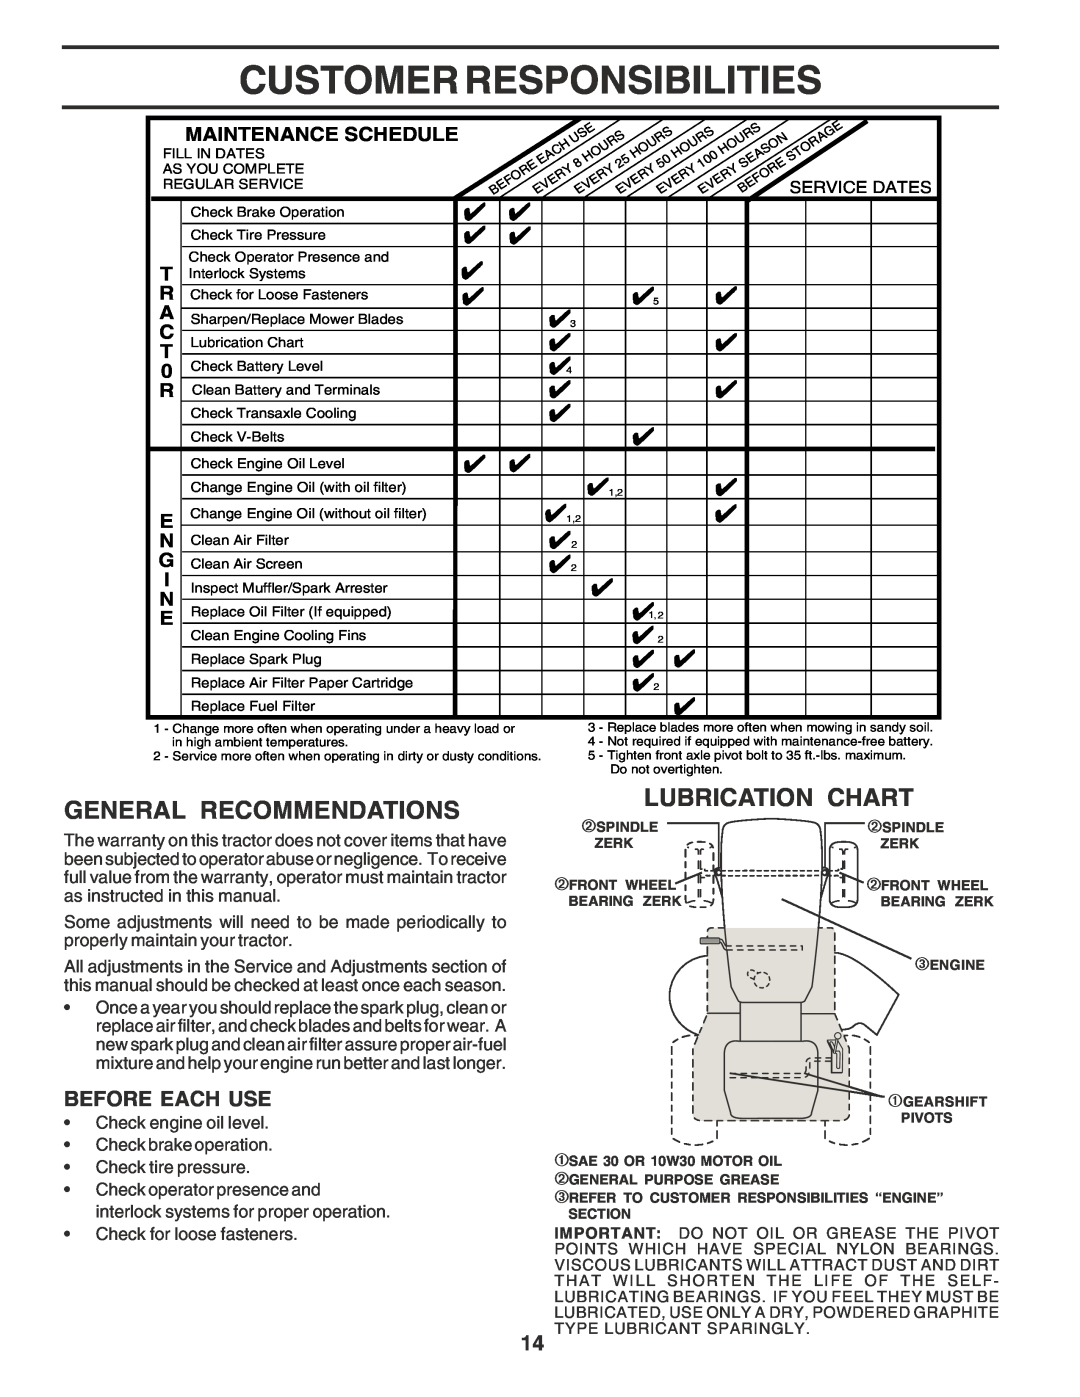 Poulan PR17542STC owner manual Customer Responsibilities, General Recommendations, Lubrication Chart, Before Each Use 